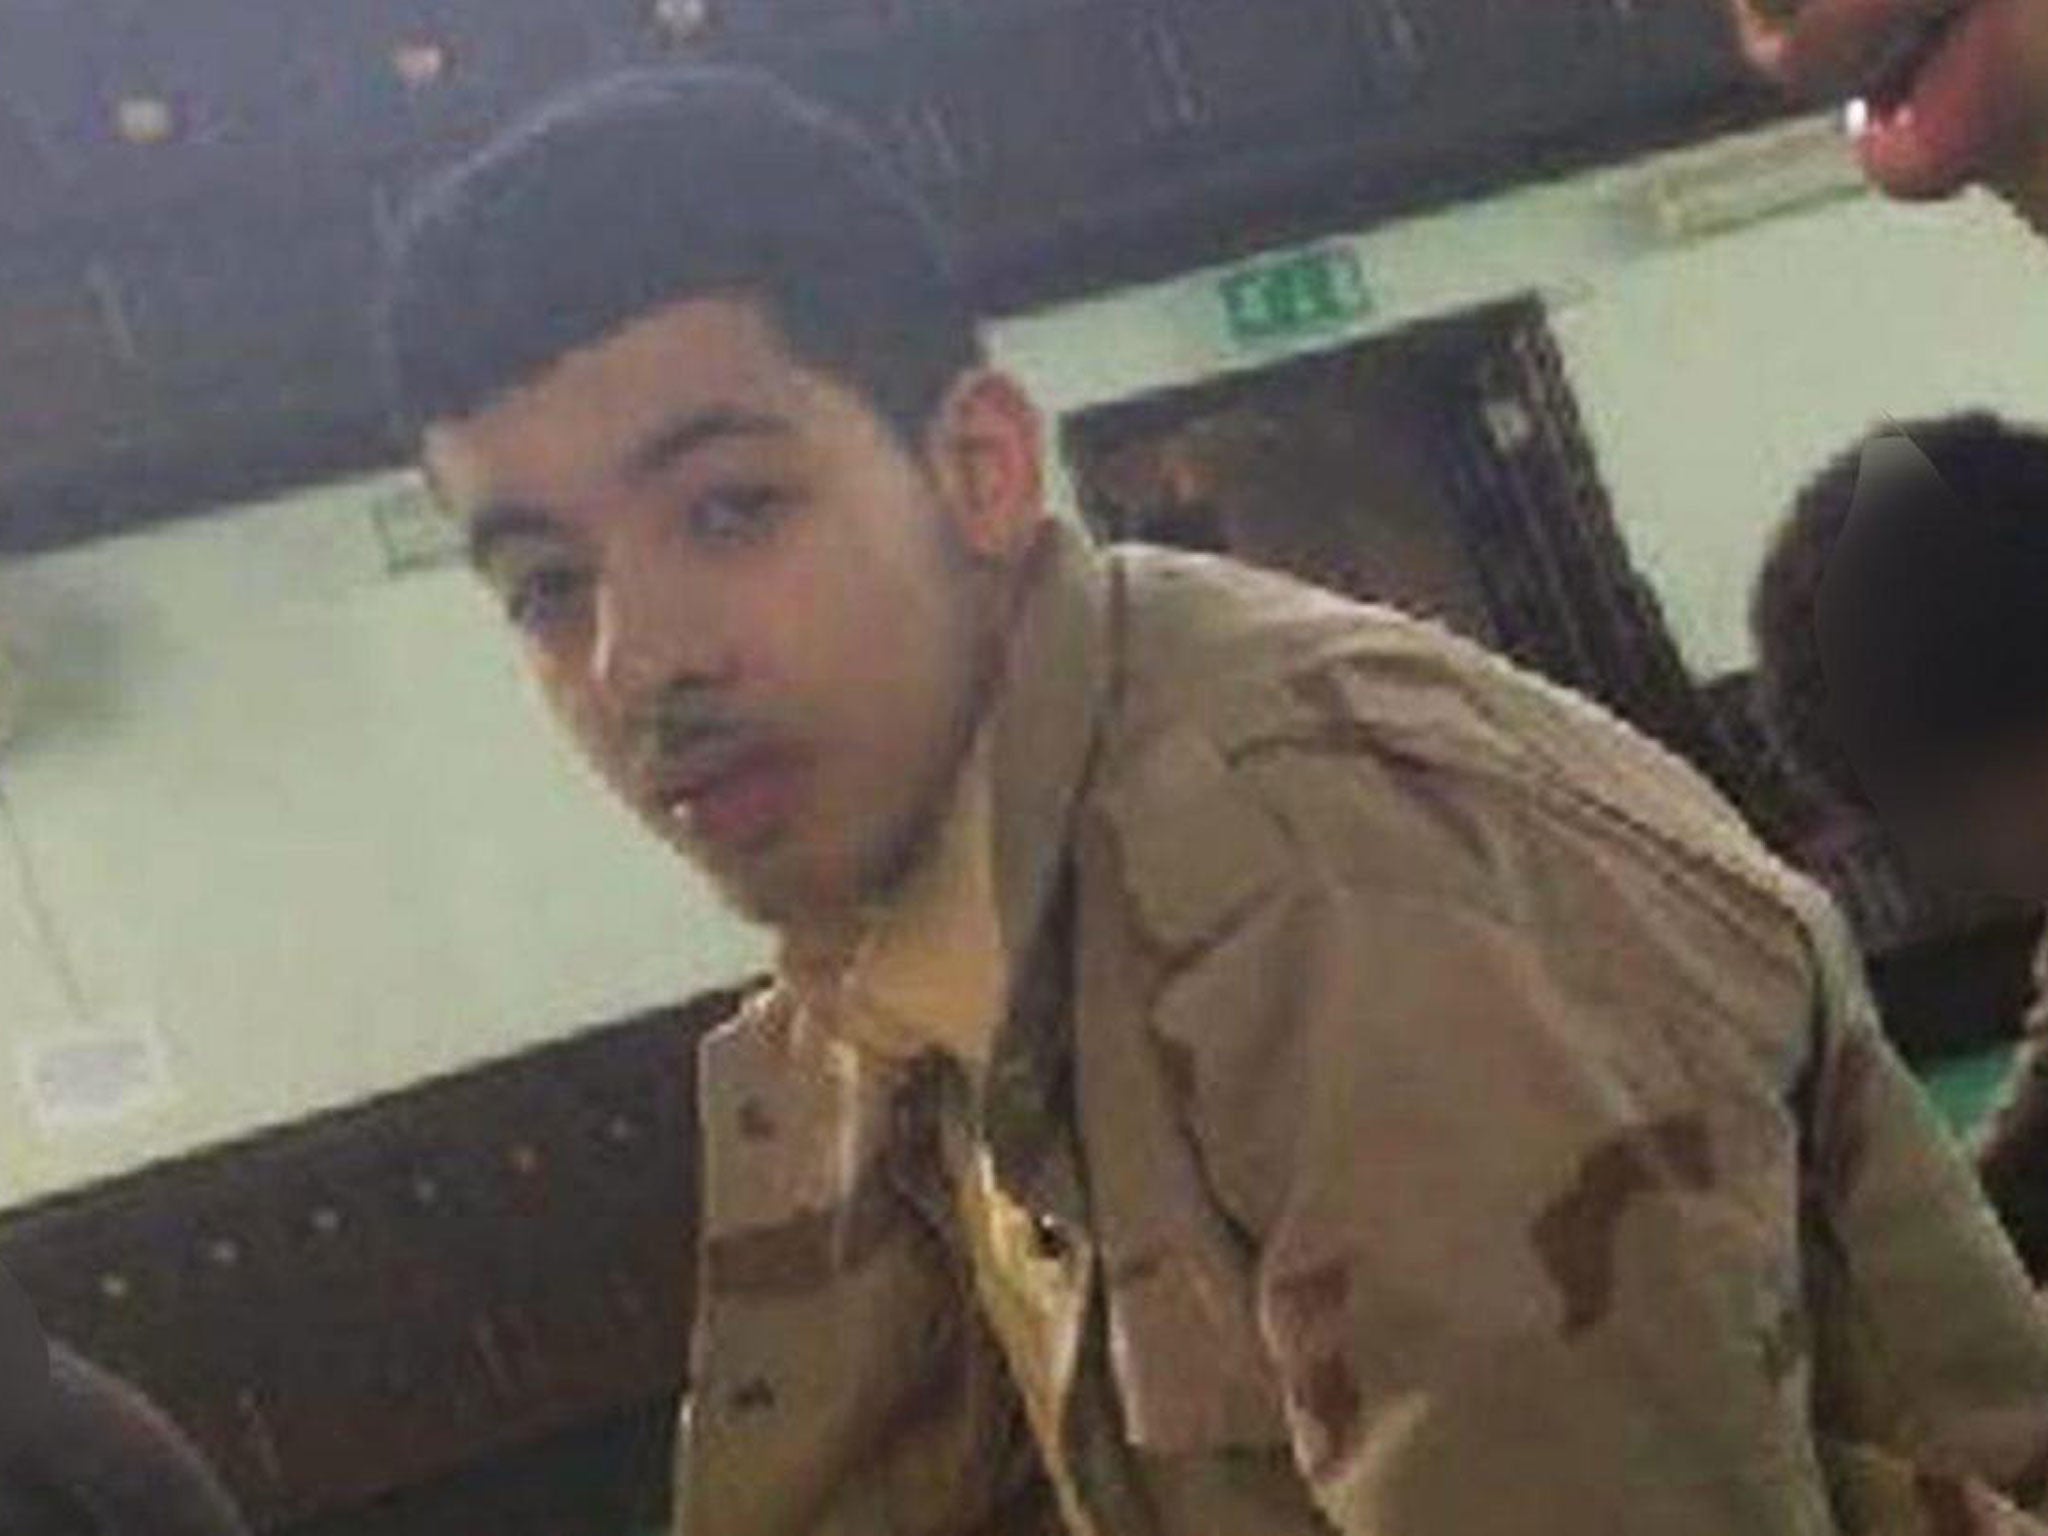 Salman Abedi, the defendant's brother, killed 22 people in an attack at Manchester Arena